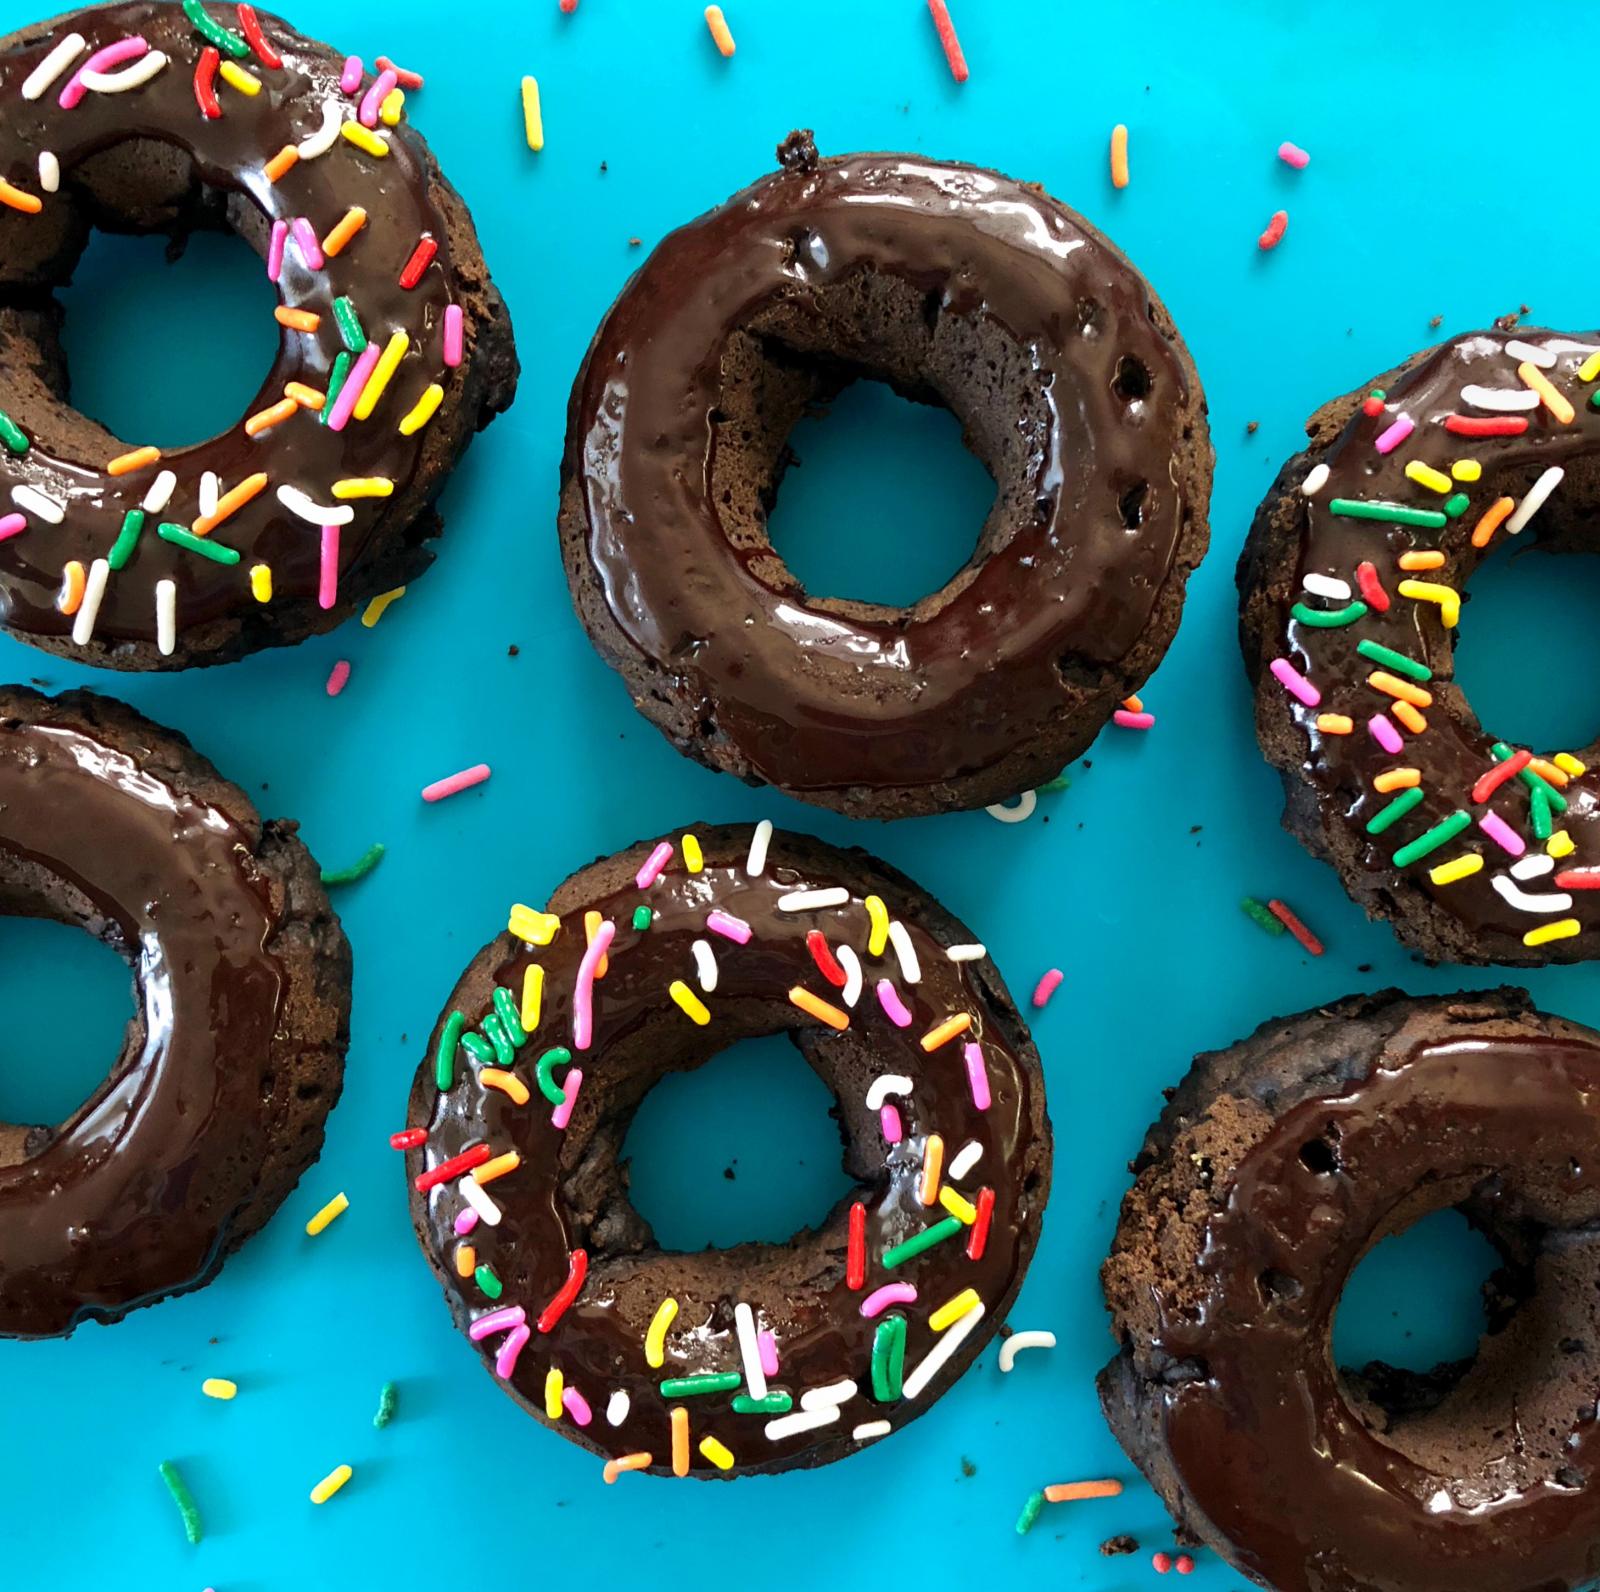 Cocoa & Nut Butter Donuts with Chocolate Passionfruit Glaze